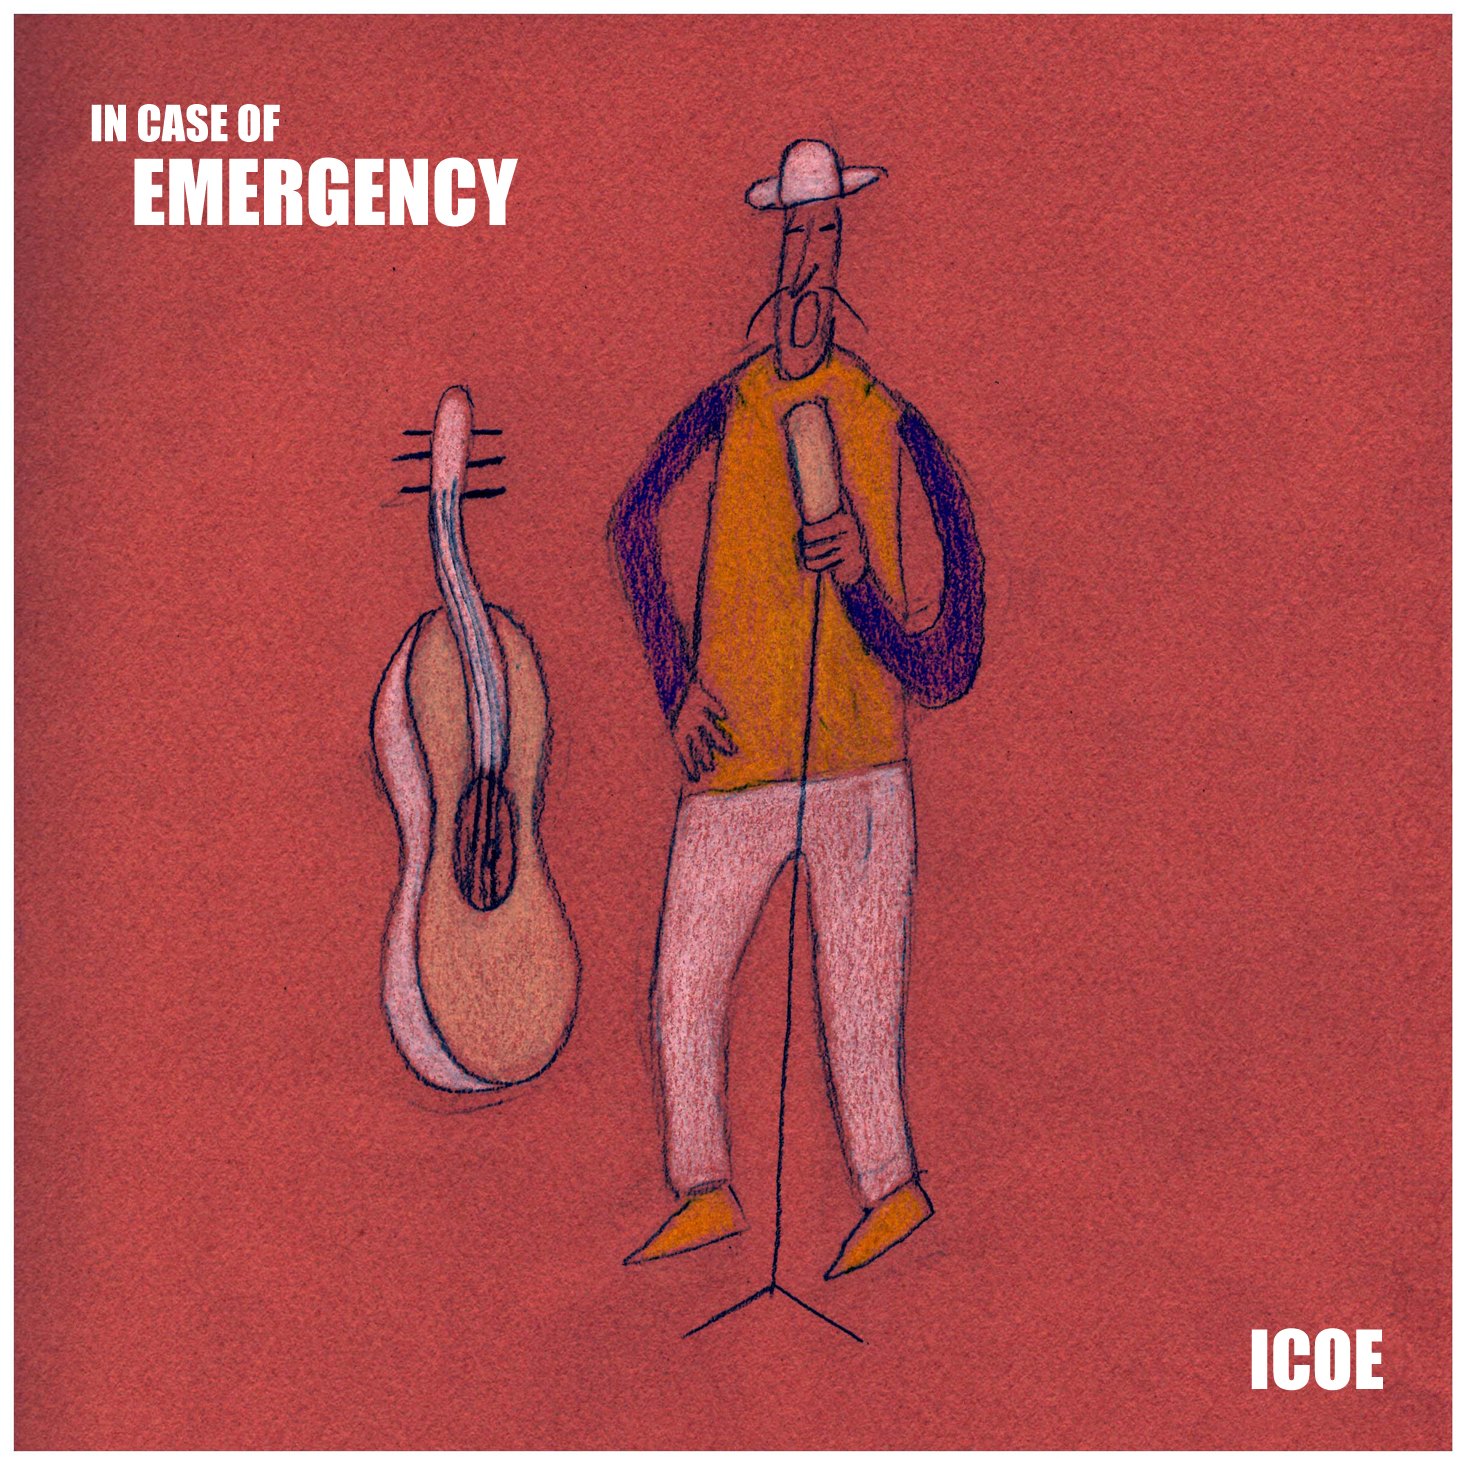 In Case of Emergency, ICOE EP - Produced by Arron Storey